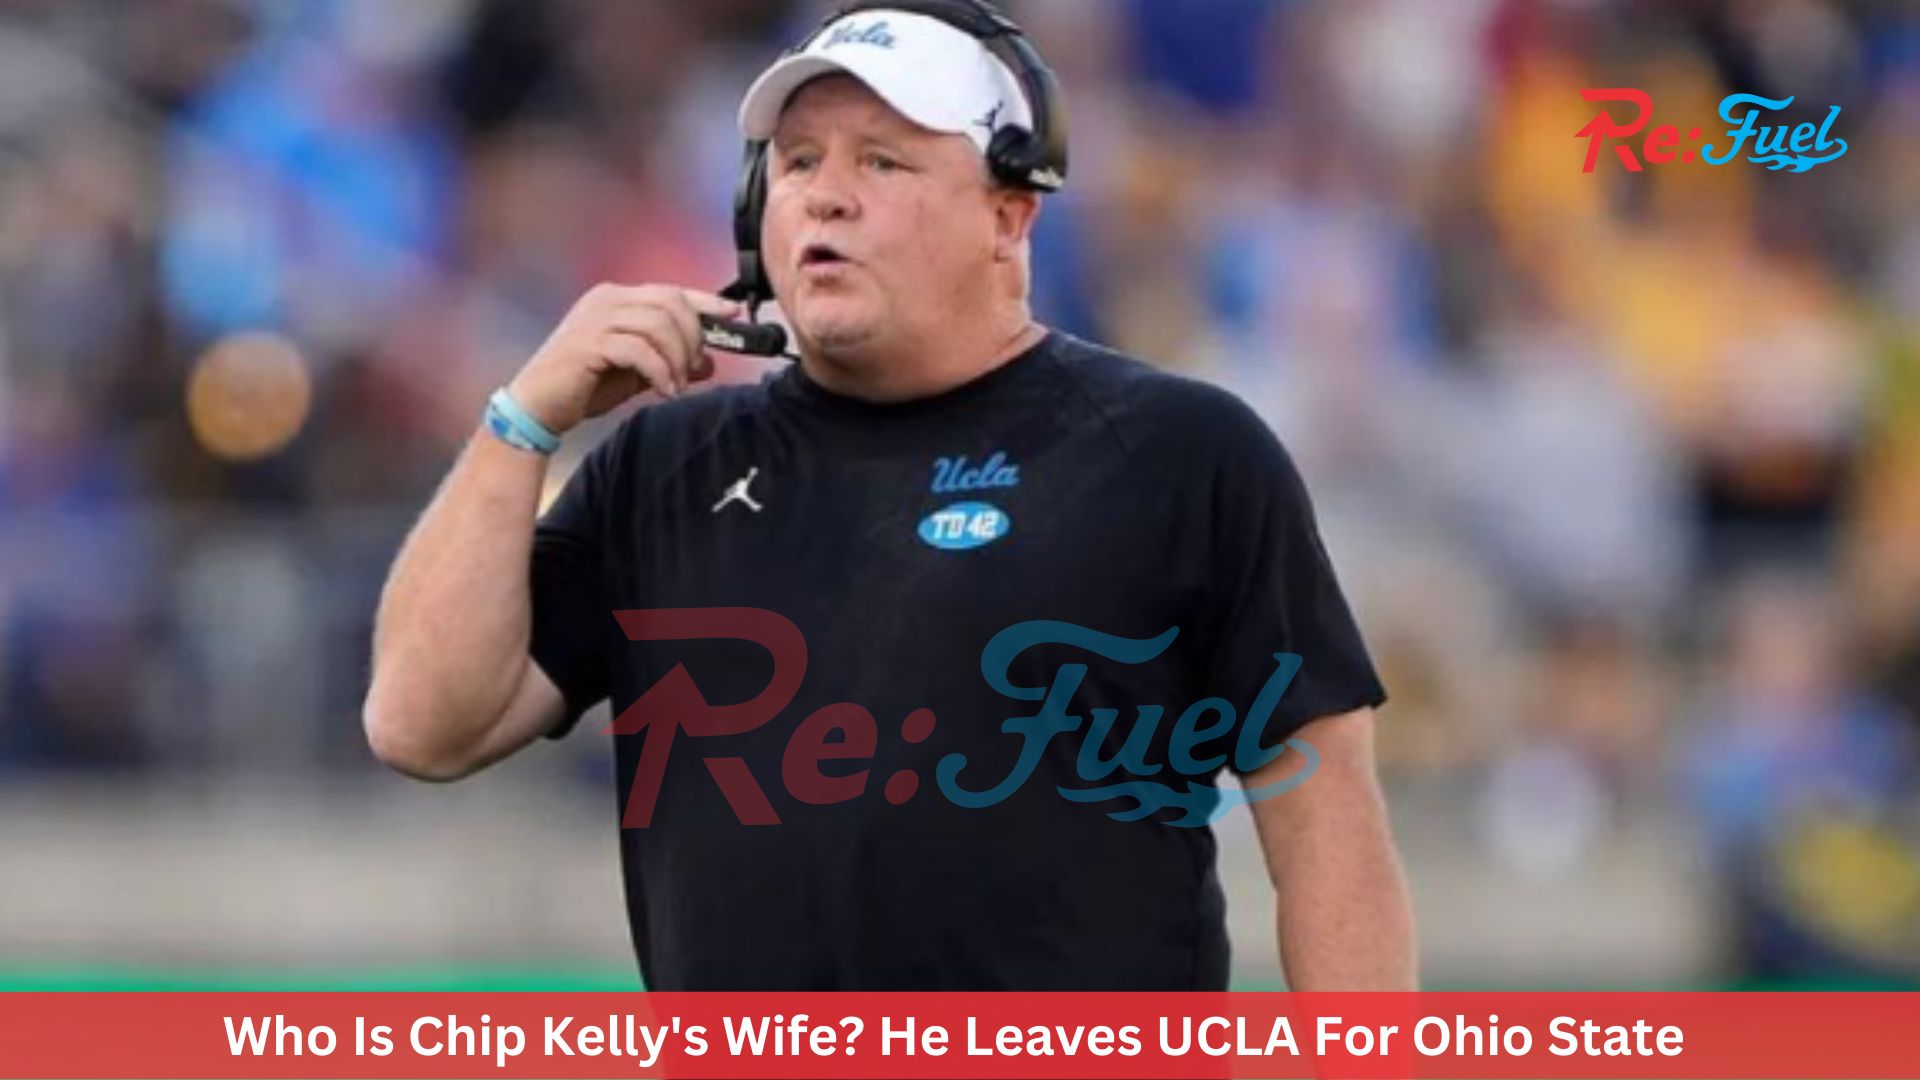 Who Is Chip Kelly's Wife? He Leaves UCLA For Ohio State